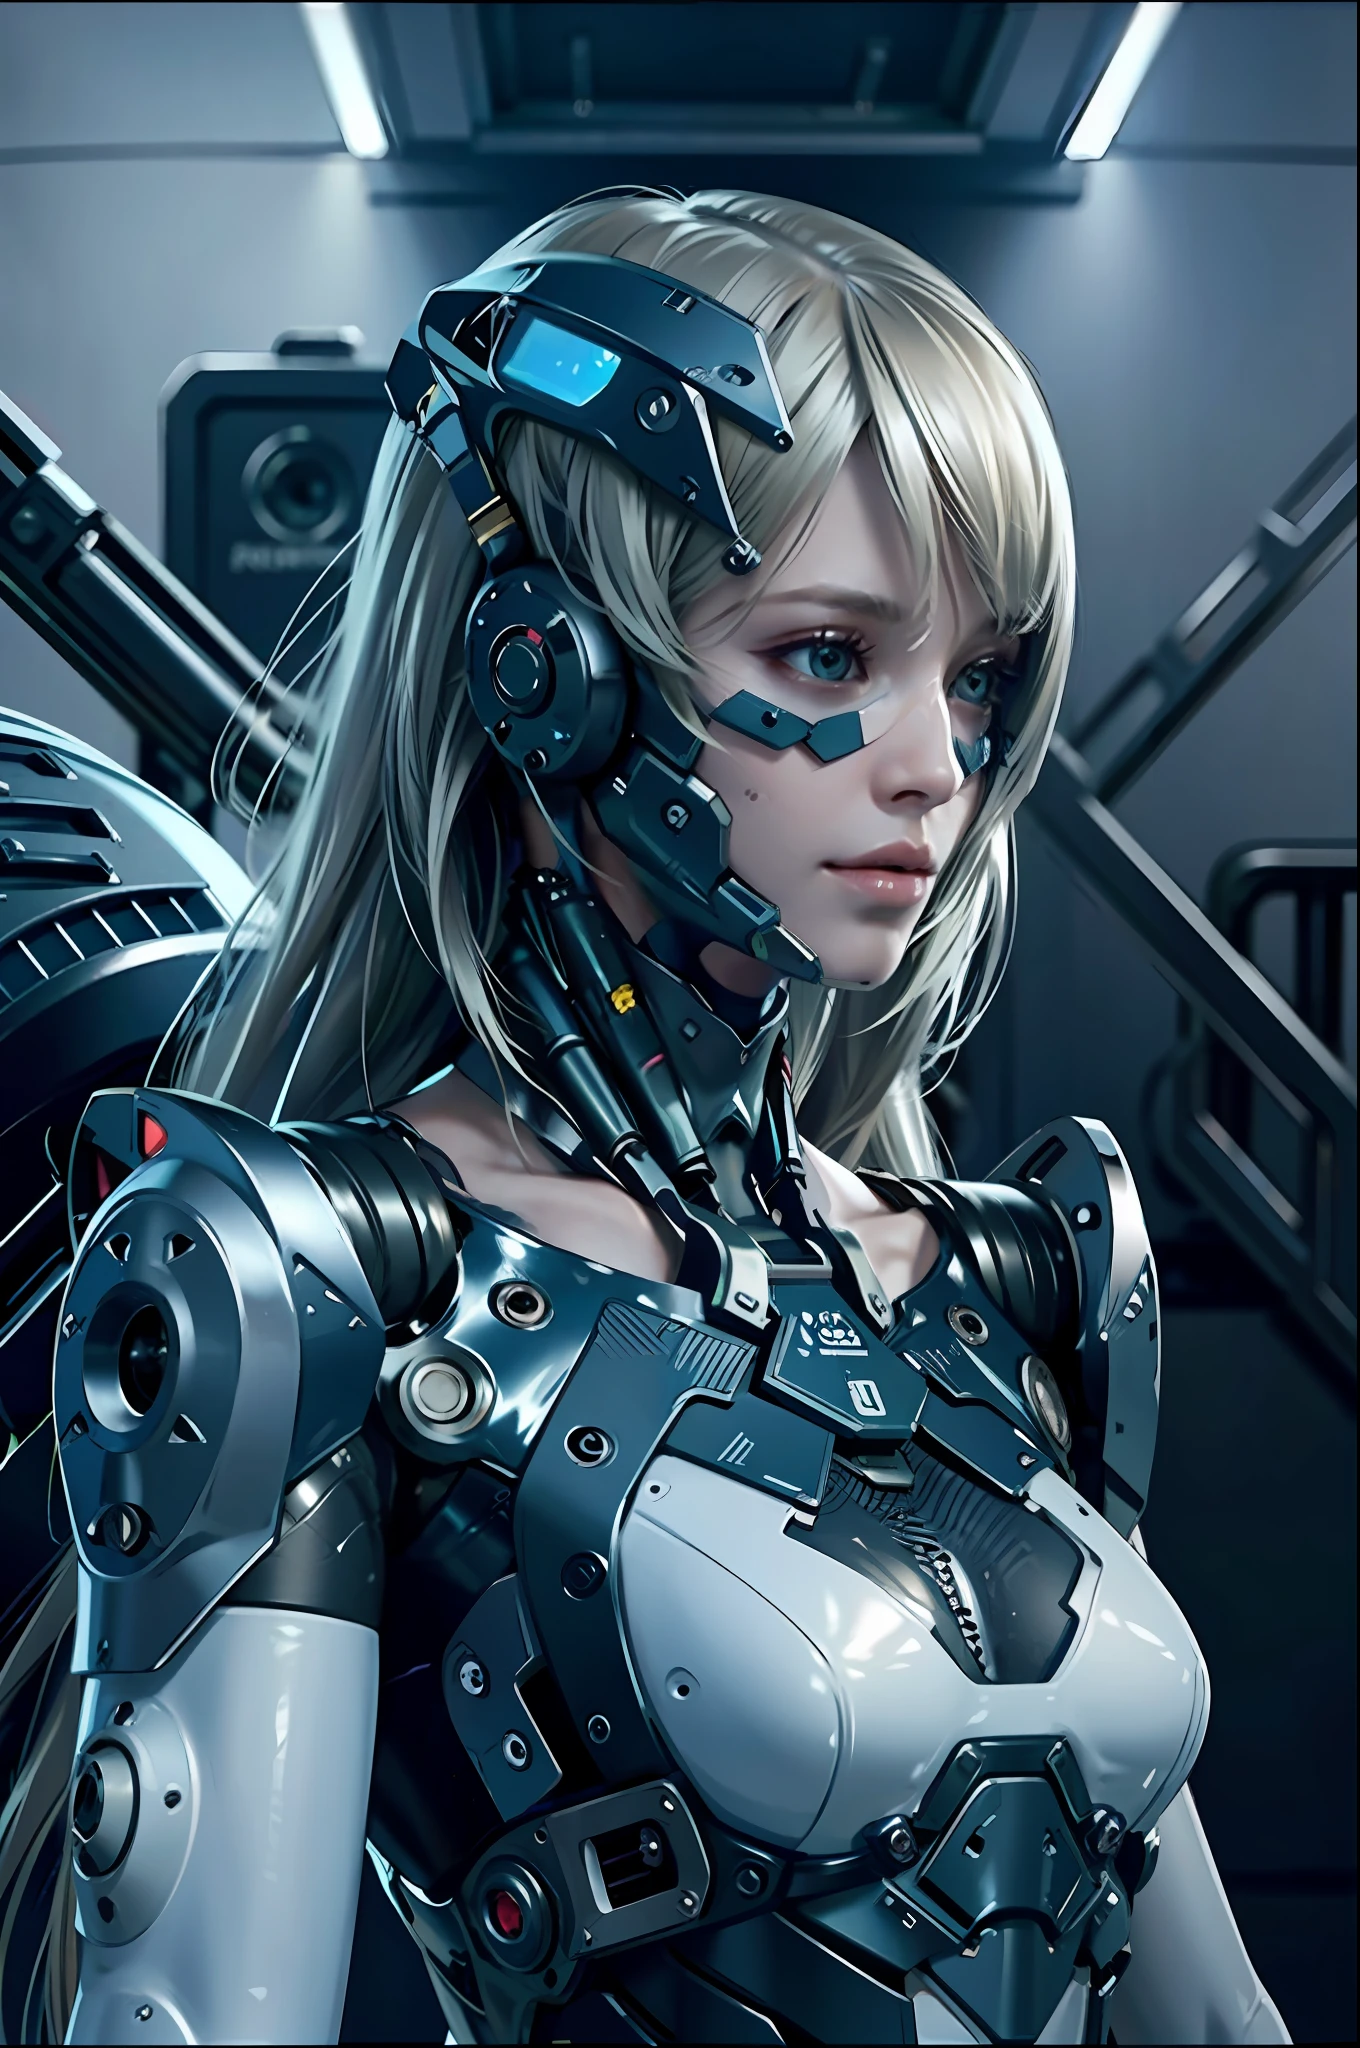 Complex 3d rendering porcelain female cyborg ultra detail, 1girl, fluffy blonde hair, long hair, small waist, (natural skin texture, realistic eye details: 1.2), robot parts, beautiful soft light, rim light, vivid details, gorgeous cyberpunk, hyper-realistic, anatomical, facial muscles, cable wire, microchip, Elegant and beautiful background, octane rendering, apple style, 8K, top quality, masterpiece, illustration, very delicate and beautiful, CG, unity, wallpaper, (realistic, photorealistic: 1.2), amazing, detail, masterpiece, best quality, official art, highly detailed cg Unity 8k wallpaper, incredibly ridiculous, sexy robot, mechanical skeleton, Android, Surrealism, Doomsday Wasteland, (High-Tech Prosthetics:1.2), Perfect Body, Dark Blue Glowing Cyber Vessel, (Shiny Body), (Very Shiny Body), rfktr_technotrex, Reelmech, Cybernetic_Jawless, Mechanical Parts, Cybernetics, AB_ Robot